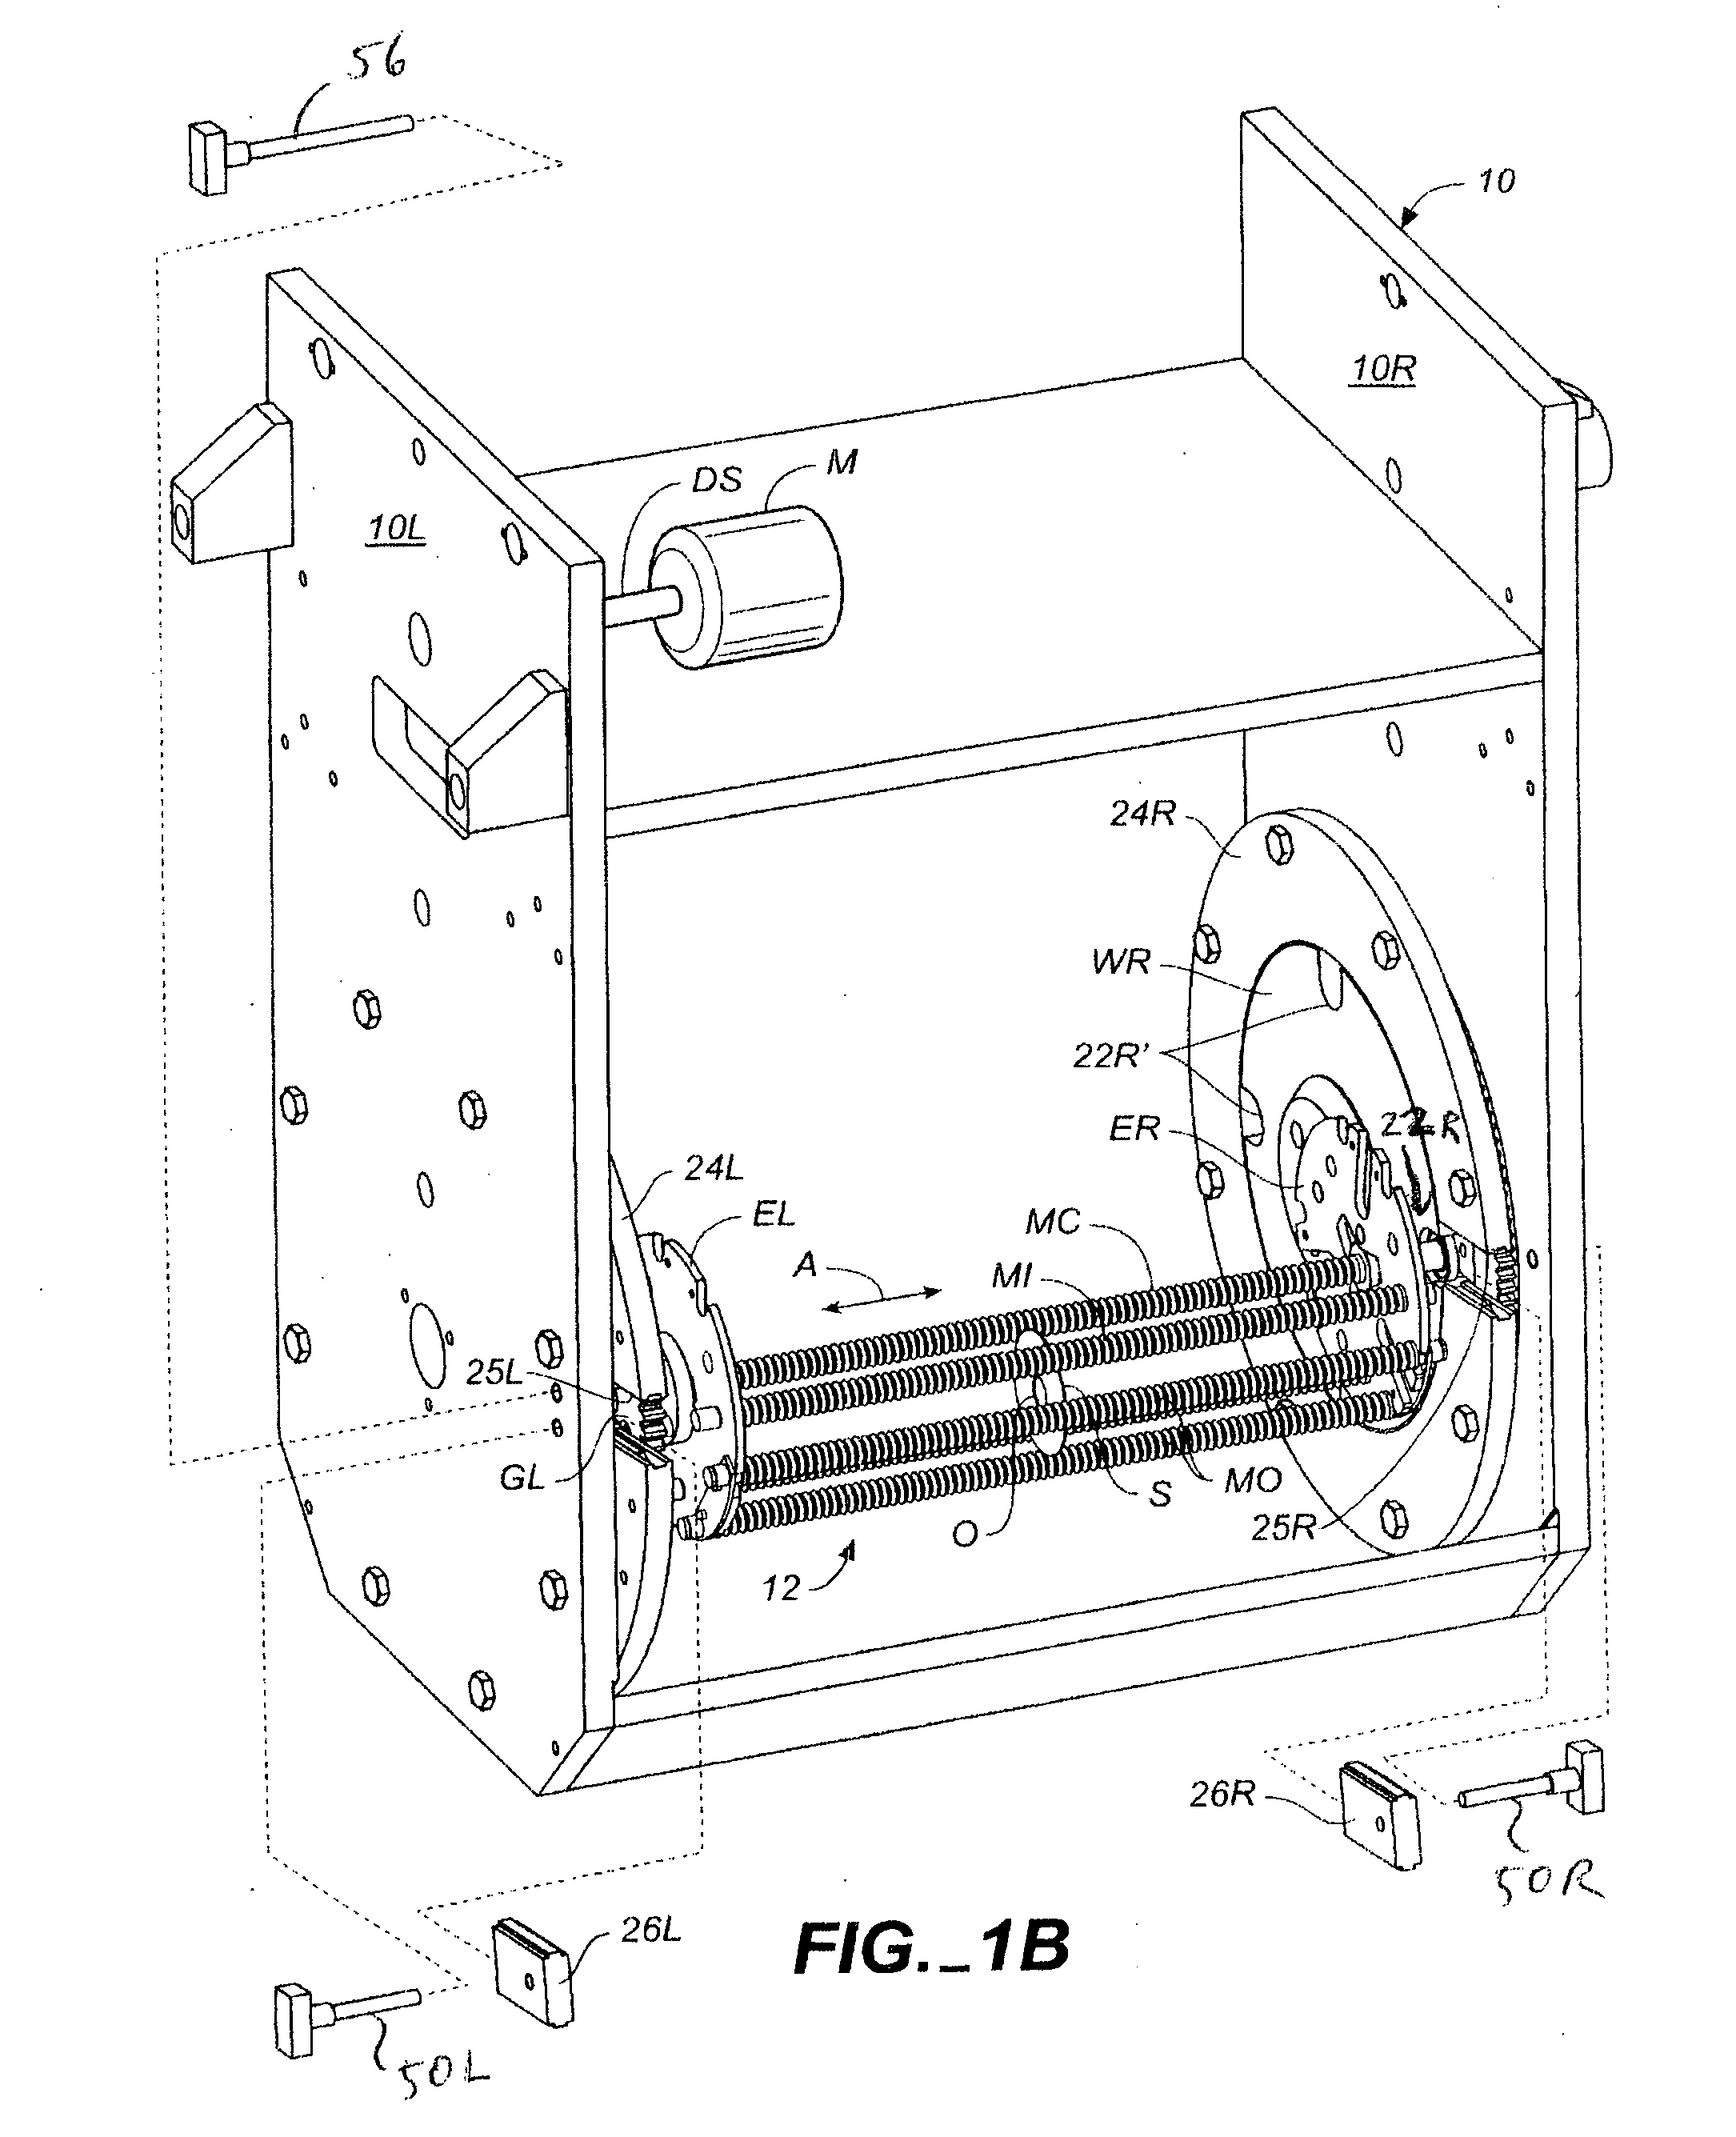 Method and apparatus for plating substrates